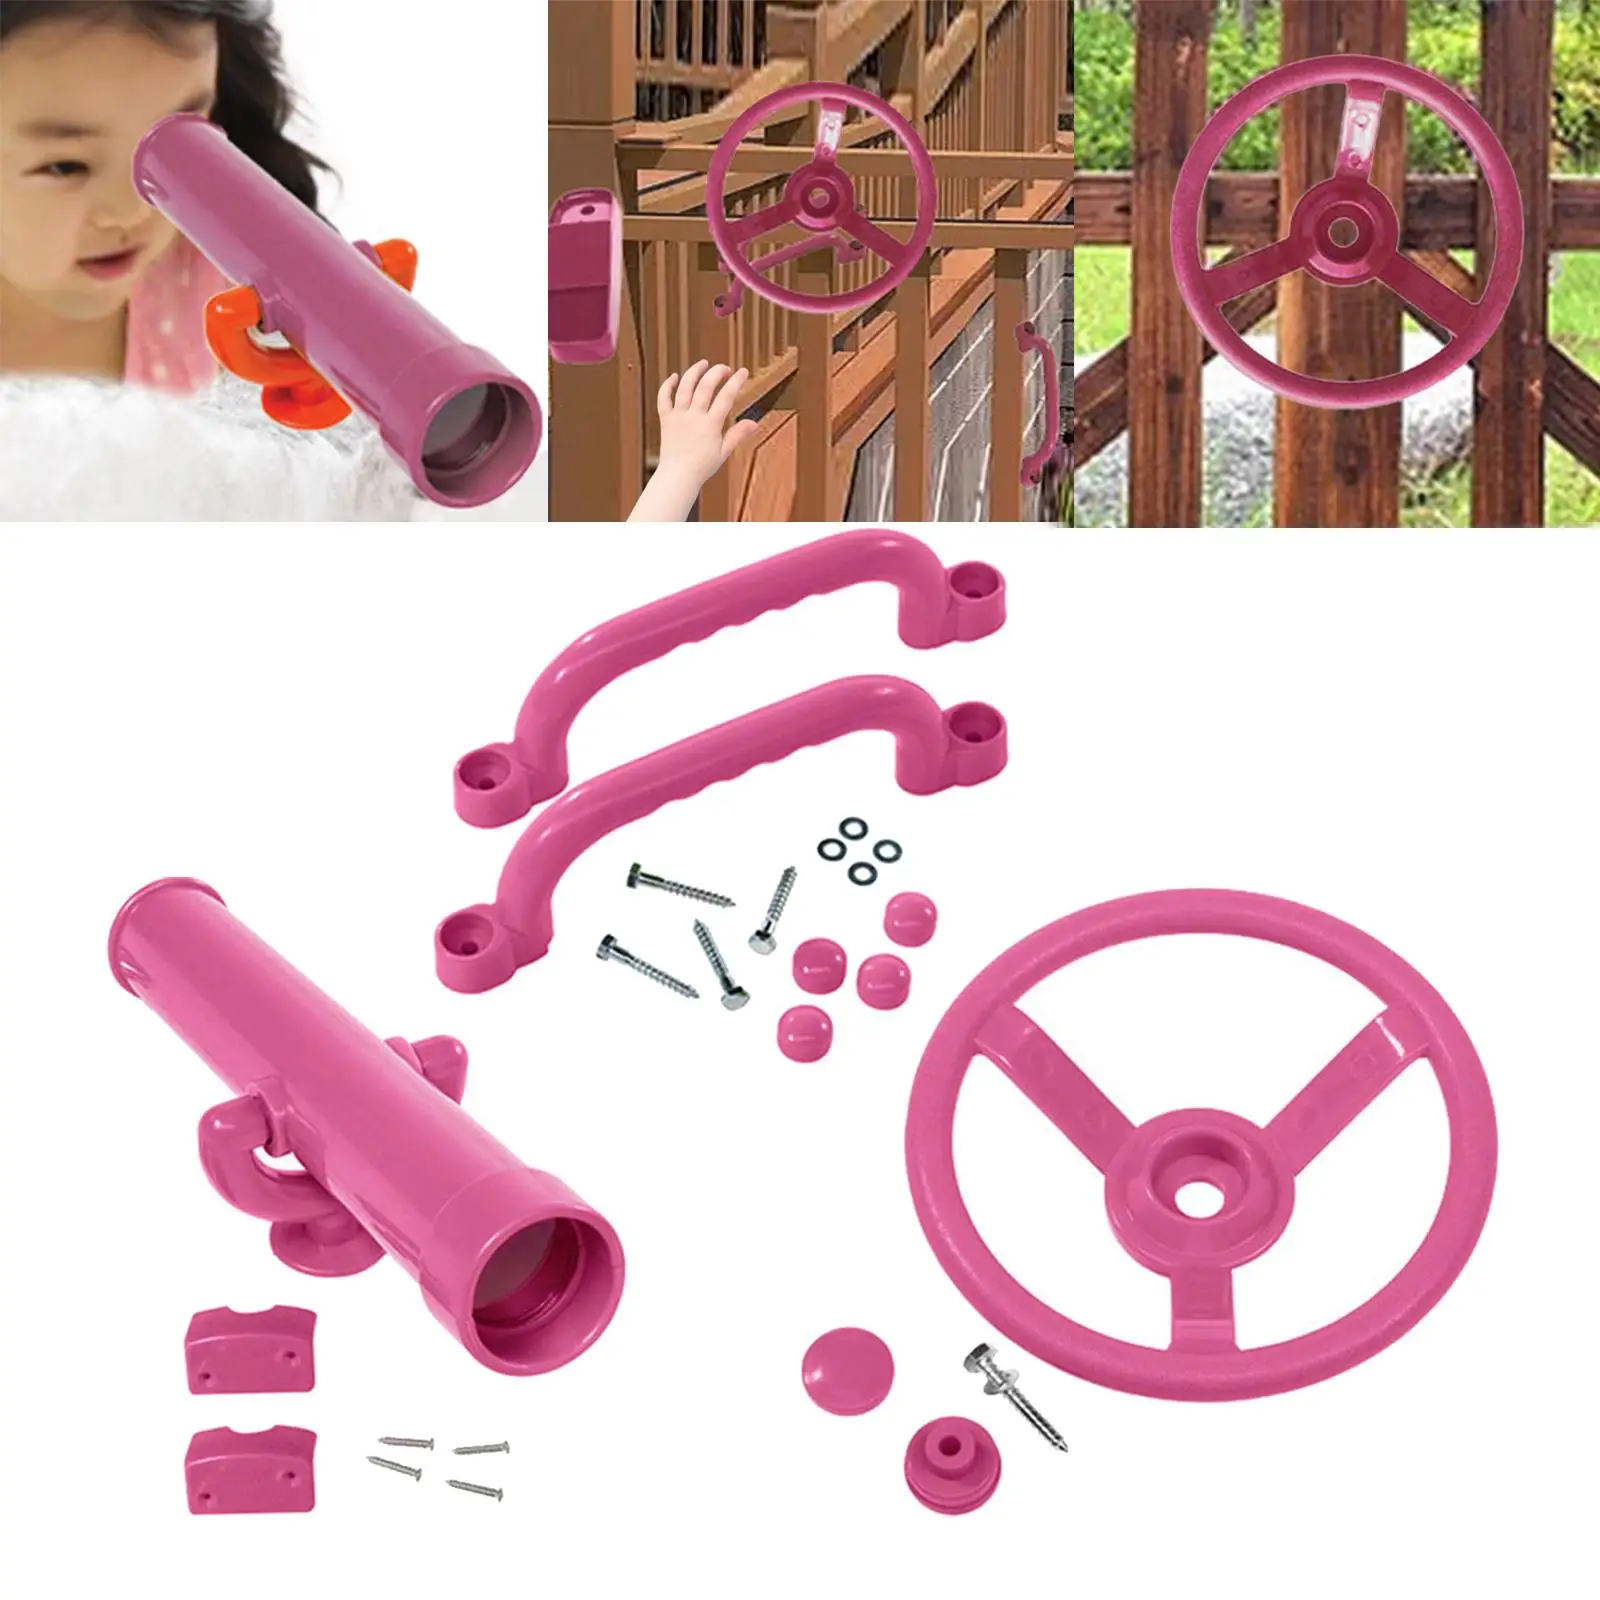 Playground Equipment Valentines Day Gifts Pirate Ship Wheel for Kids for Climbing Frame Tree House Backyard Swingset Parts